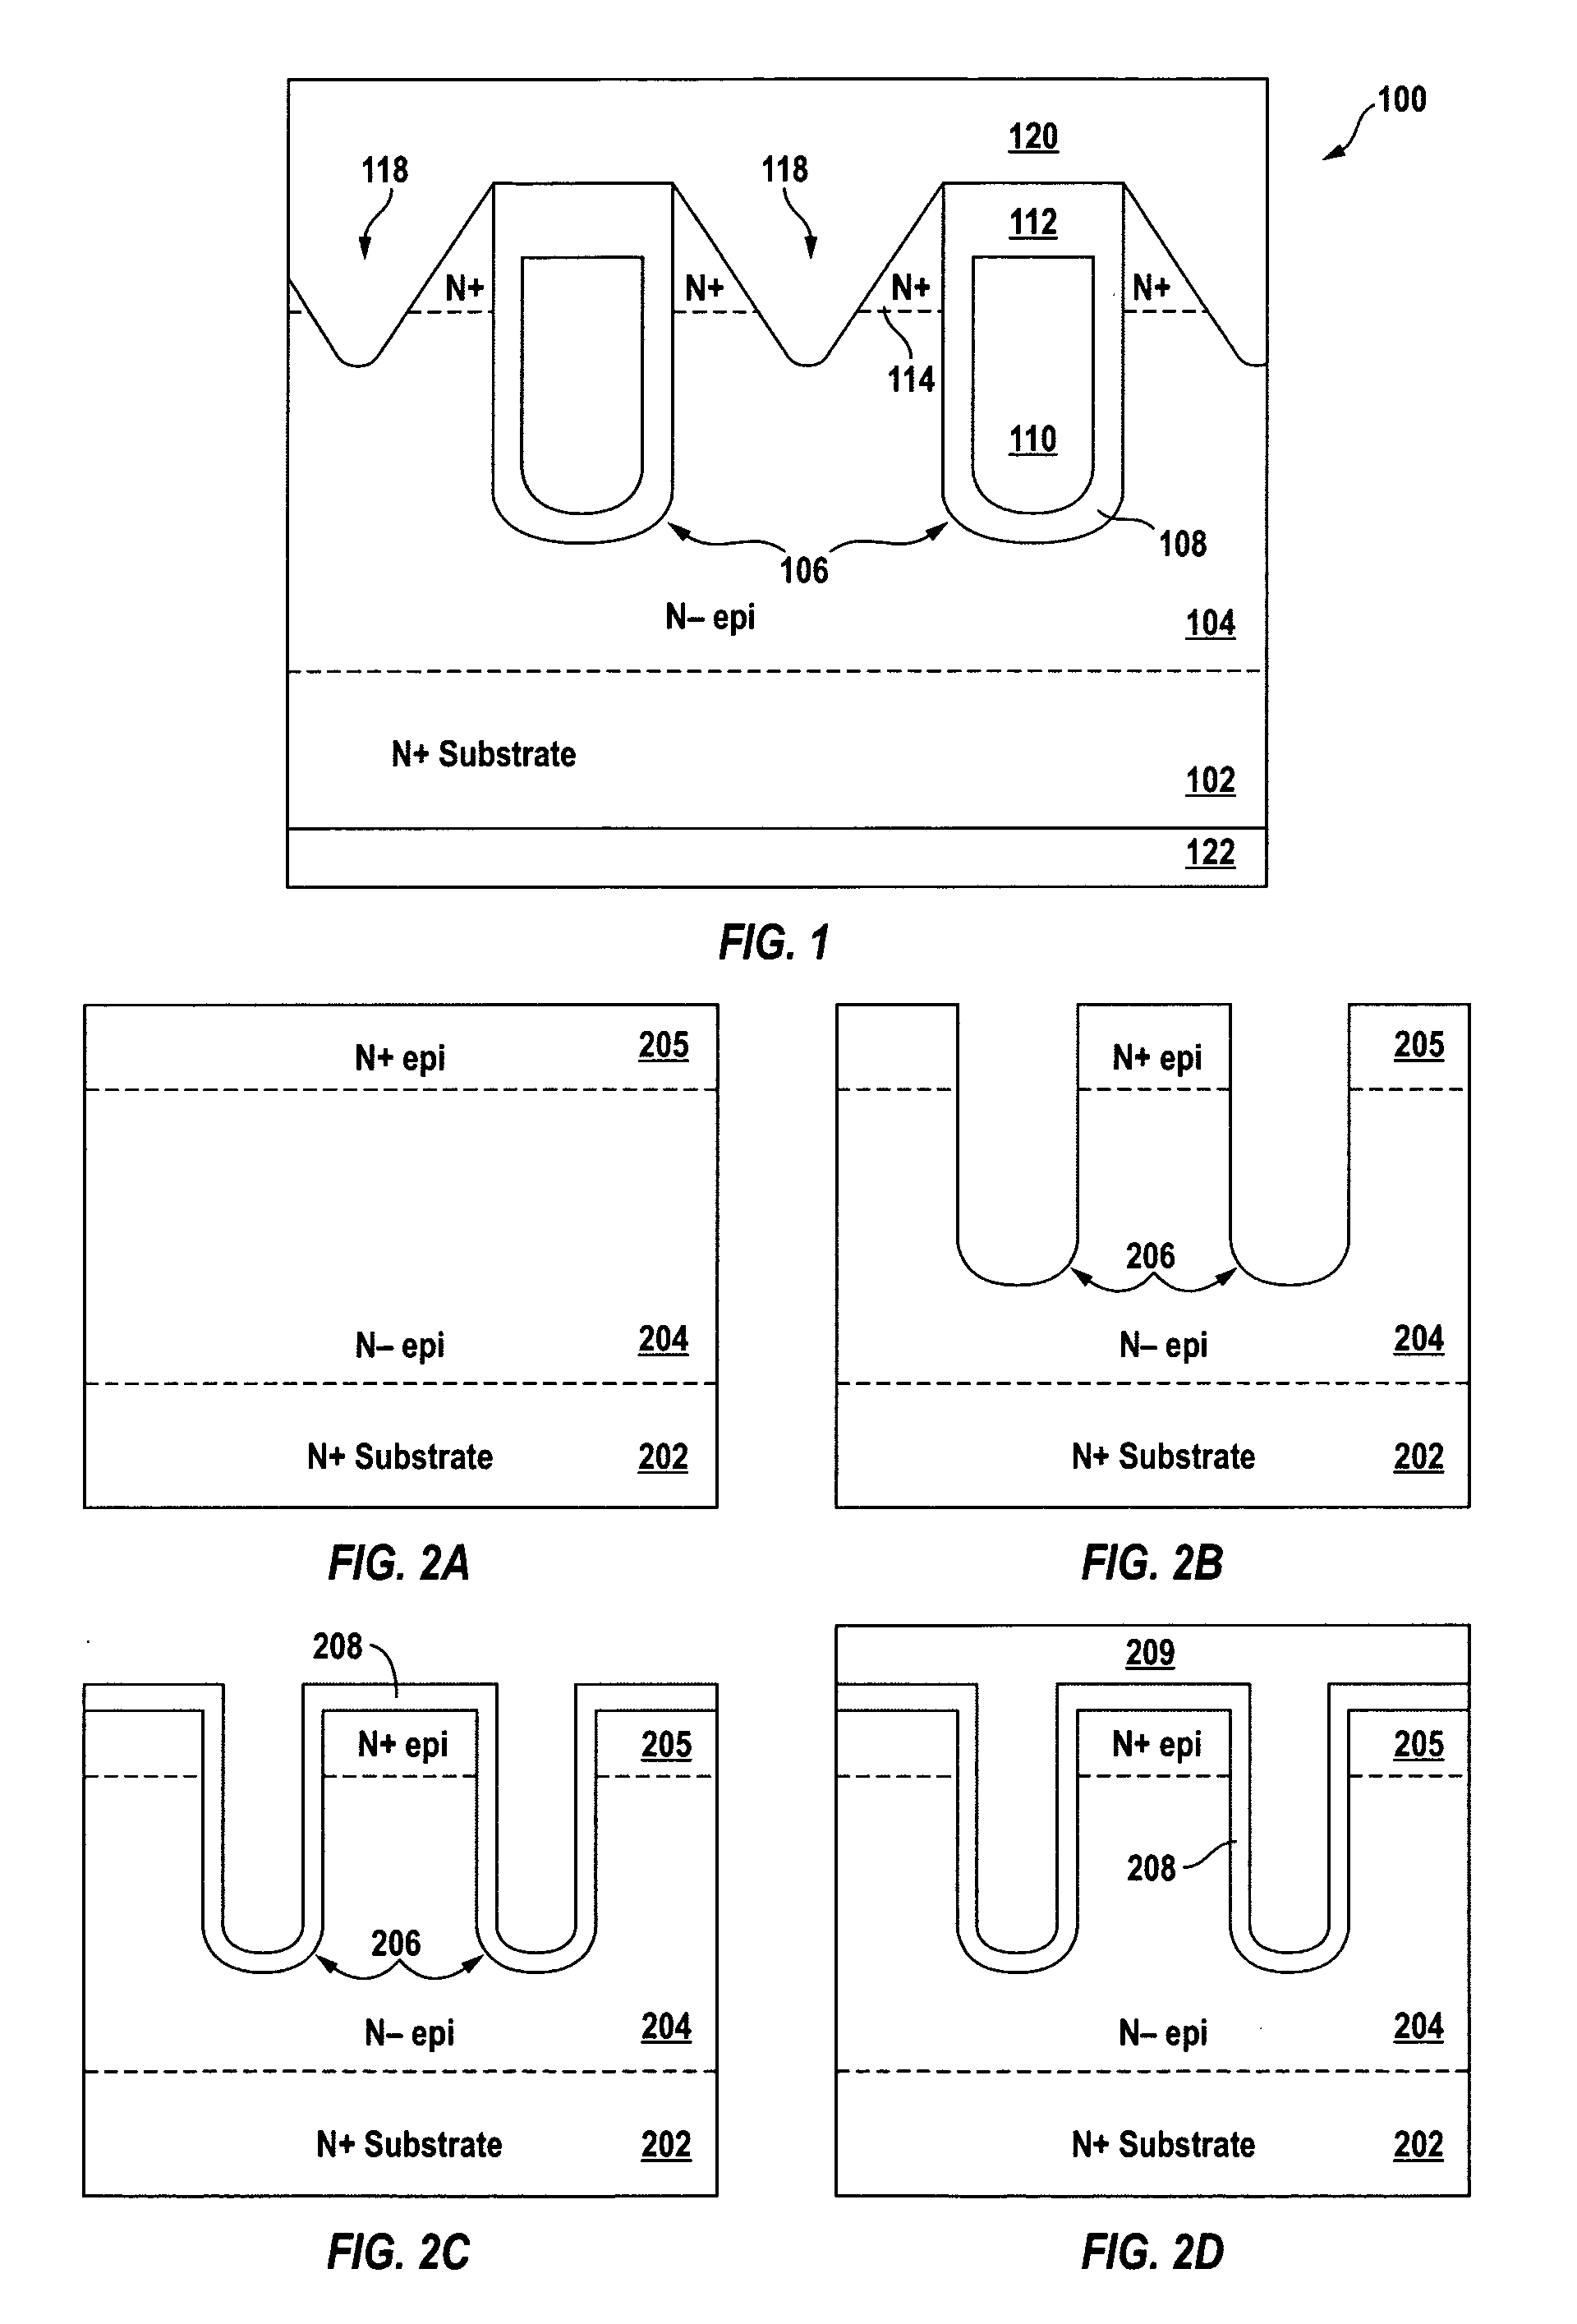 Trenched-gate field effect transistors and methods of forming the same